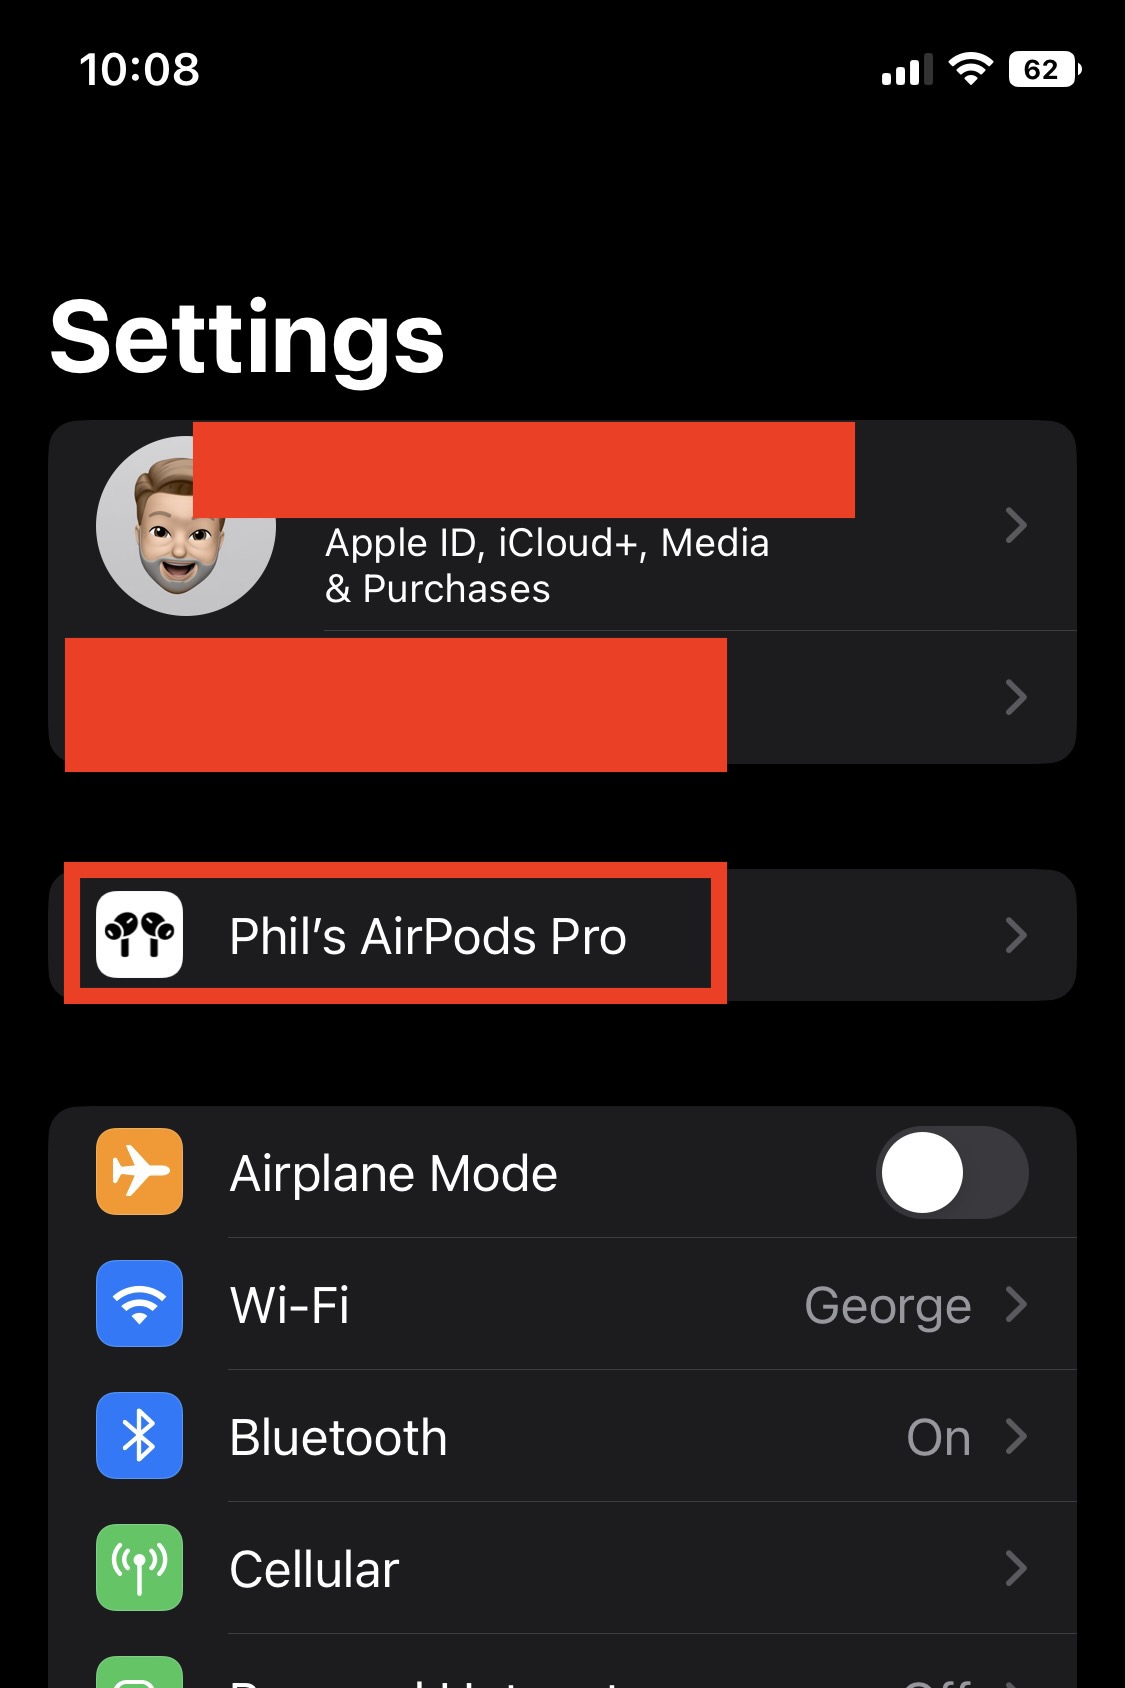 The AirPods Pro settings screen on an iPhone.